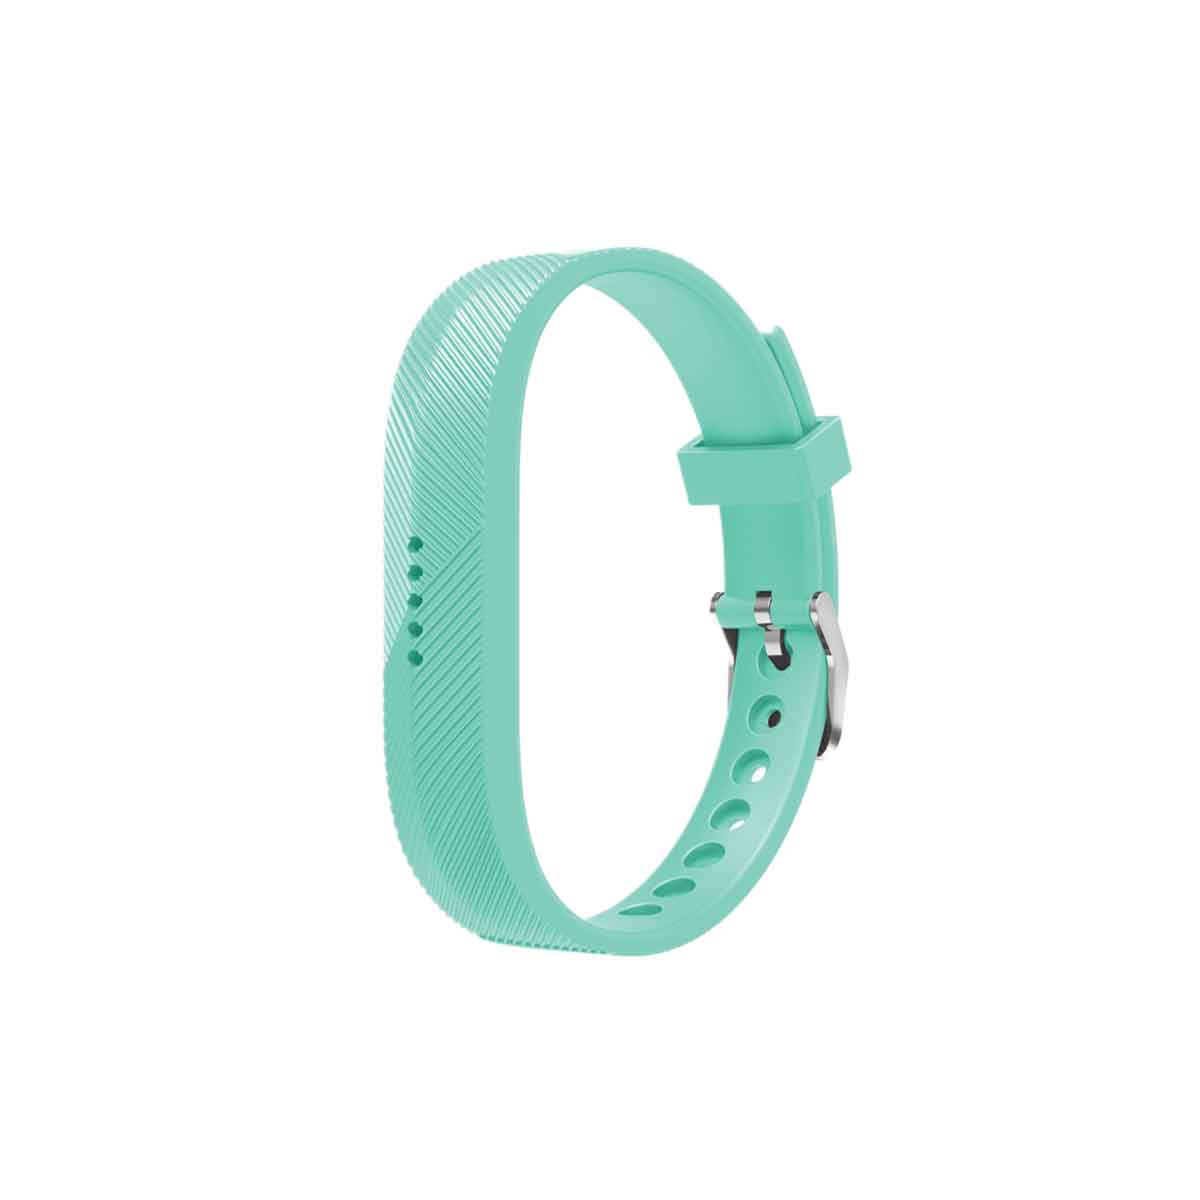 Secure Fitbit Flex 2 Band Replacement Strap with Buckle Teal  